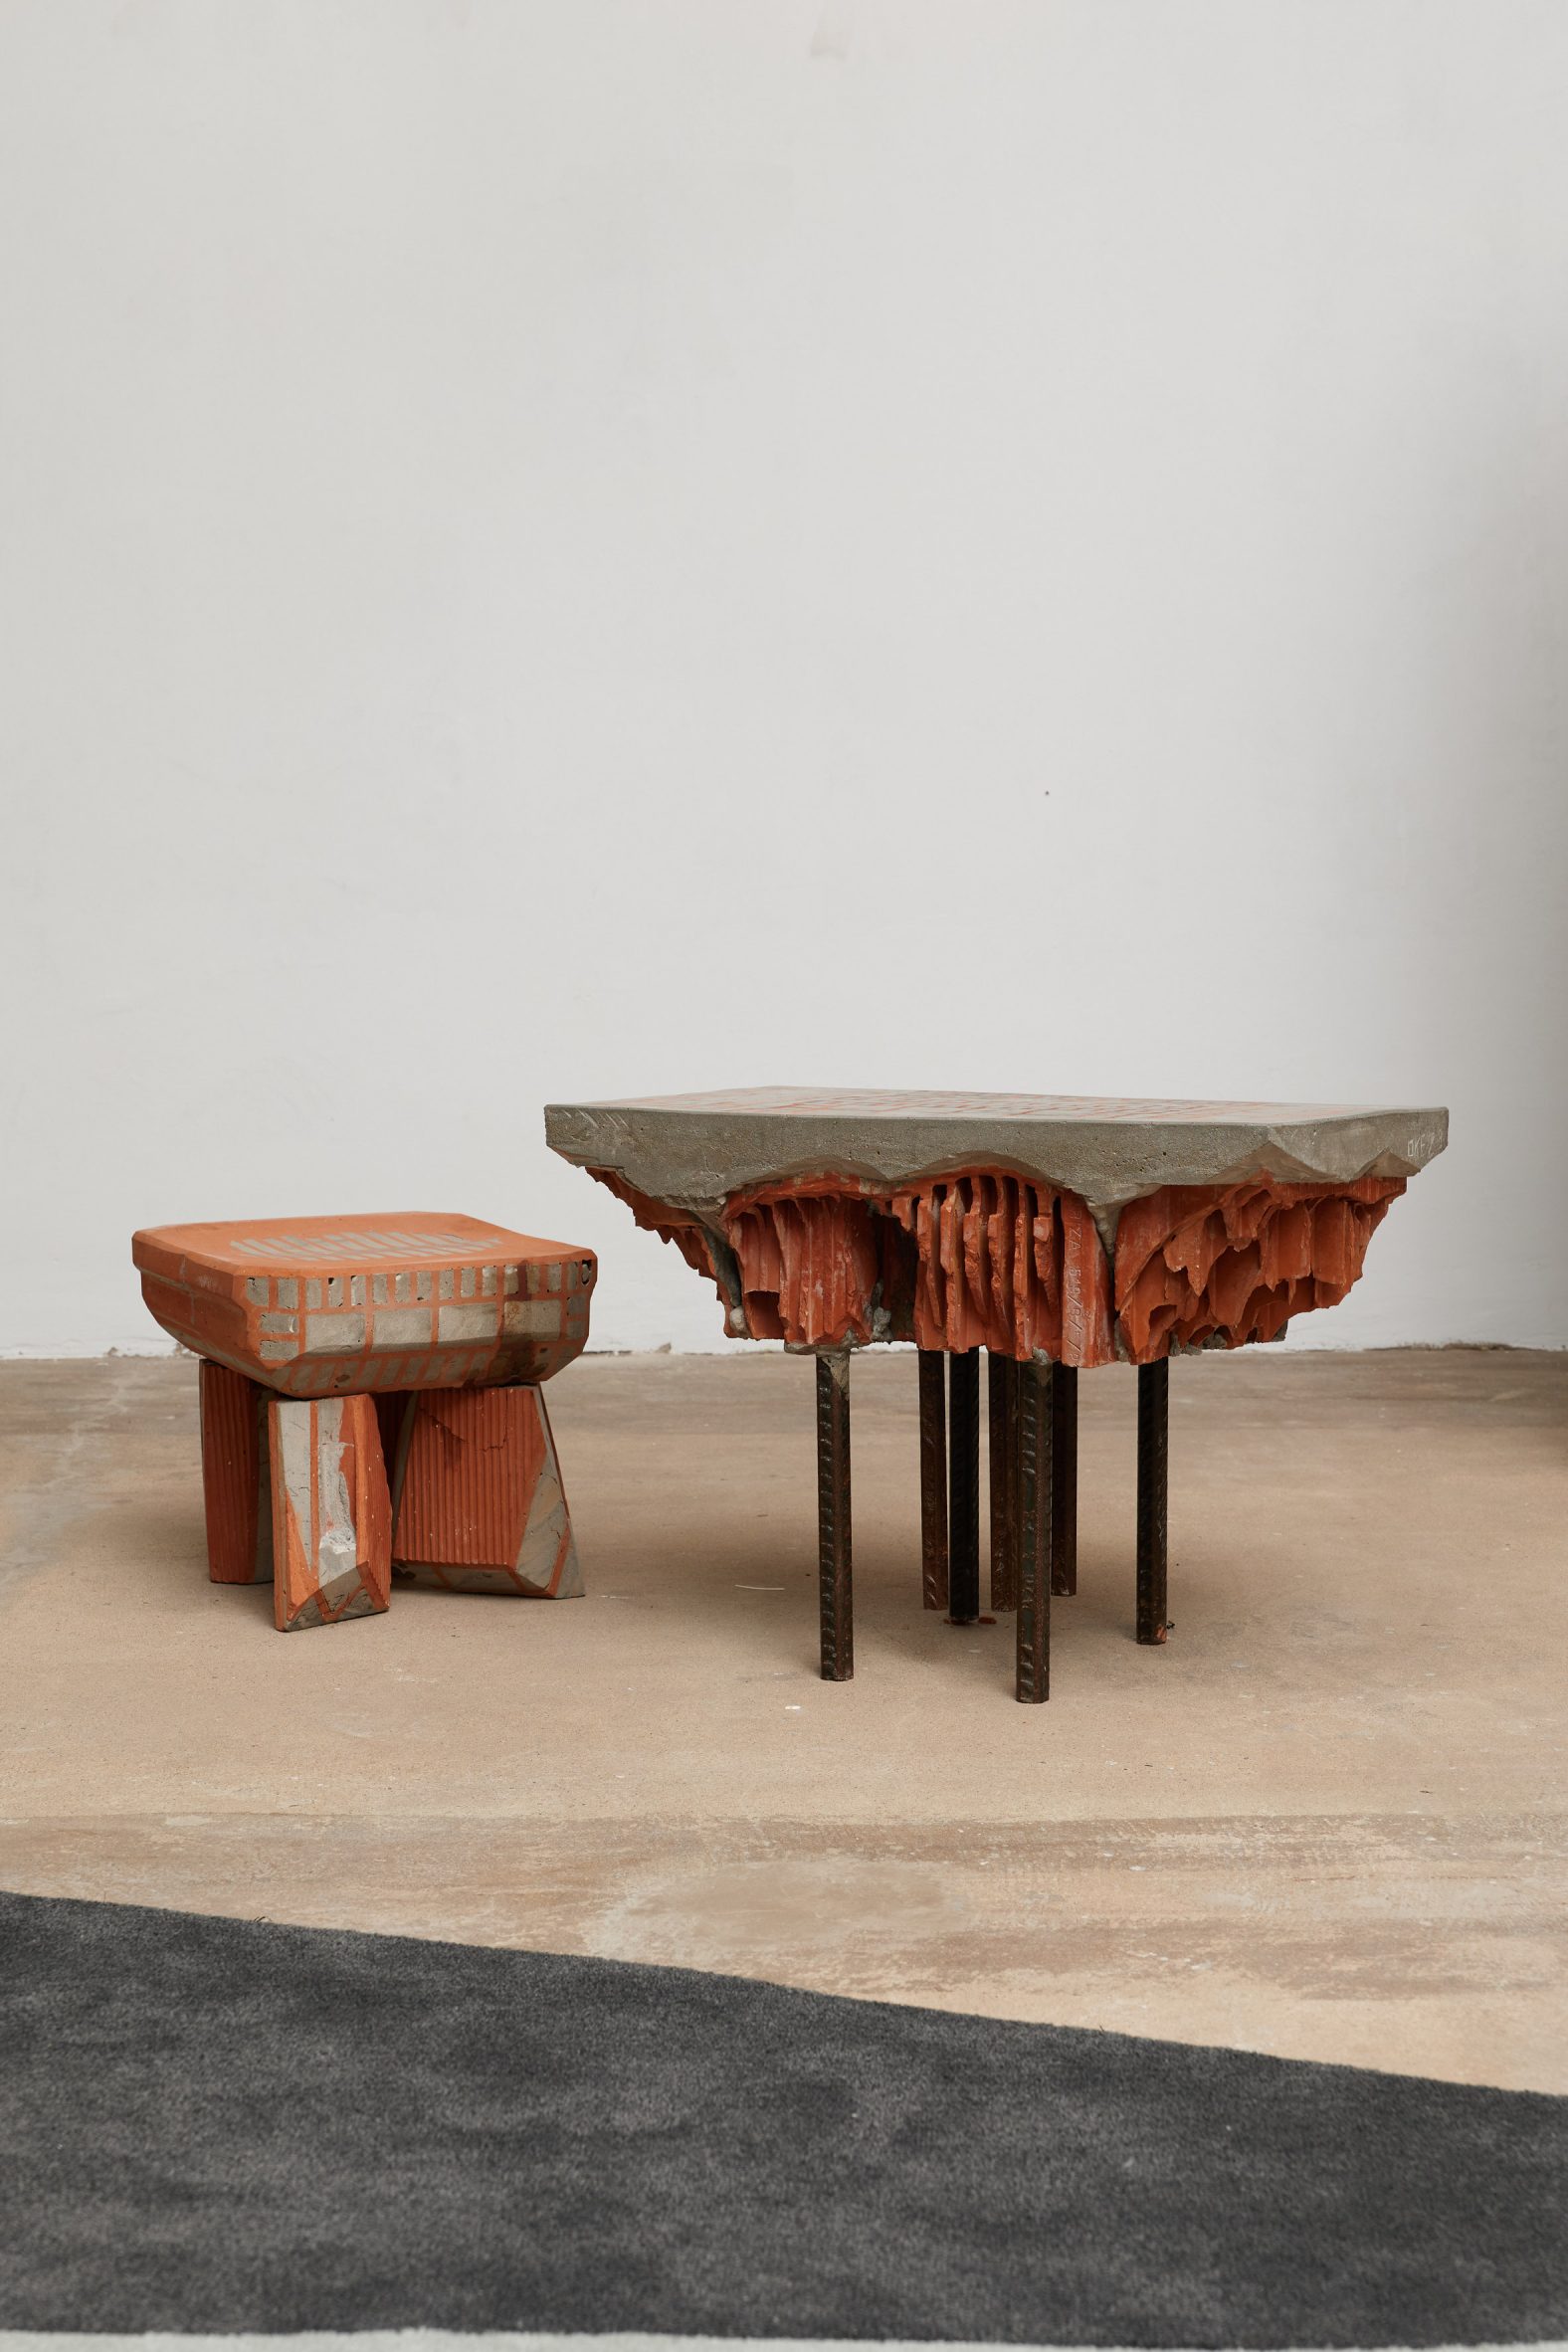 A concrete table and stool